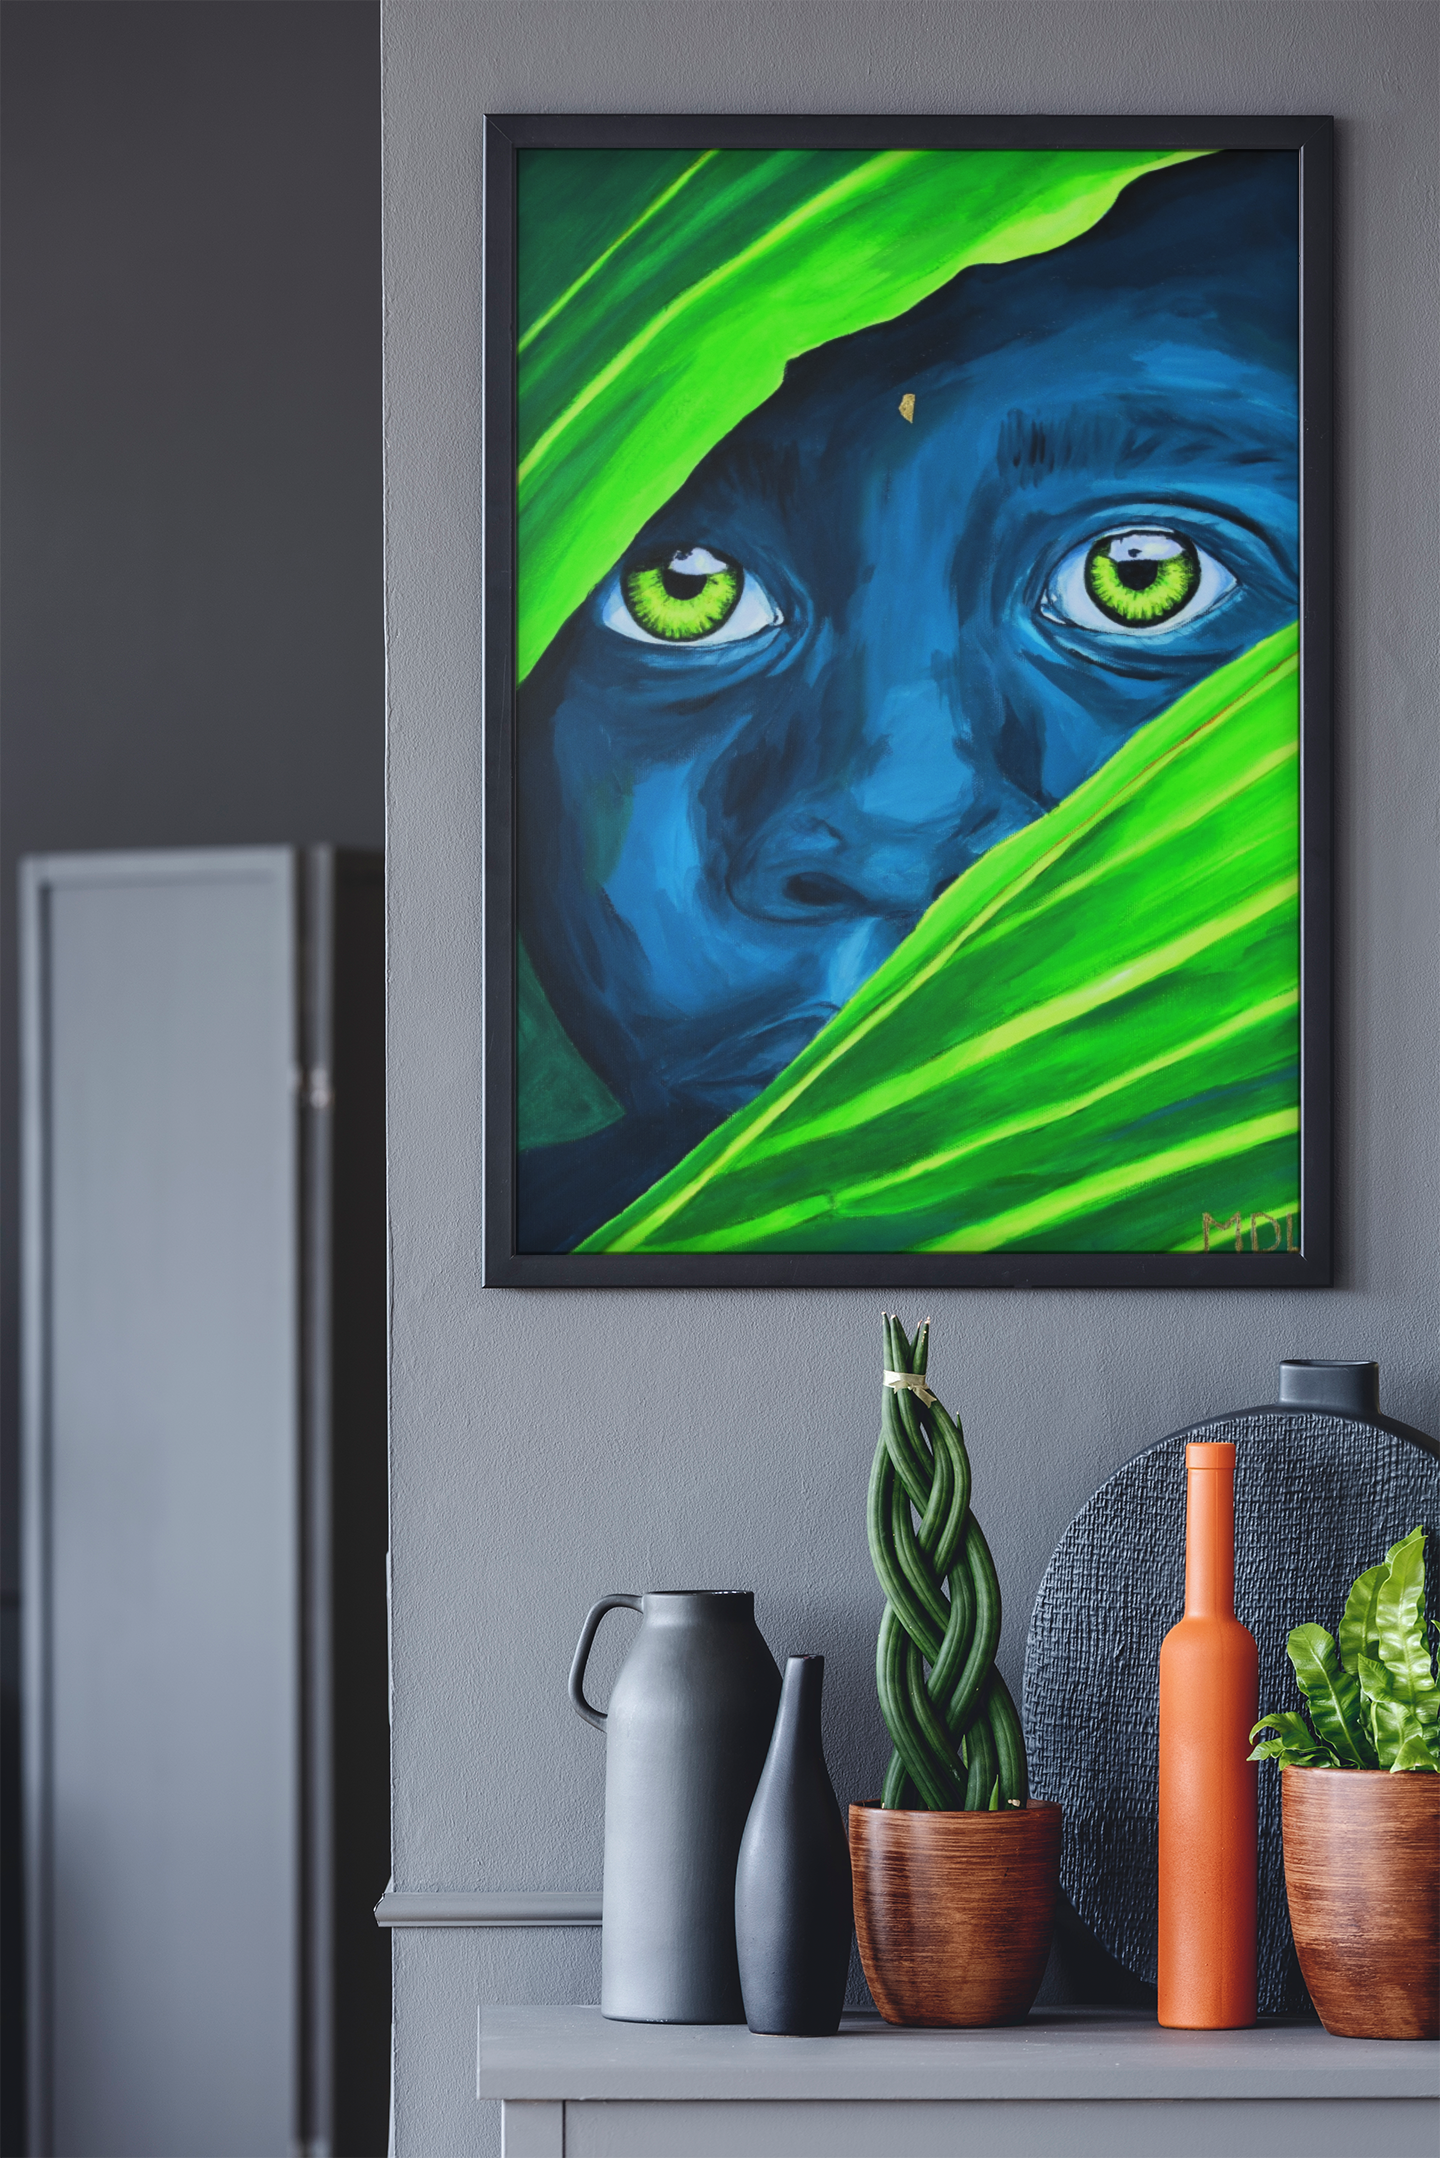 A giclee art print of an African Boy hanging on the wall over a table with objects on it